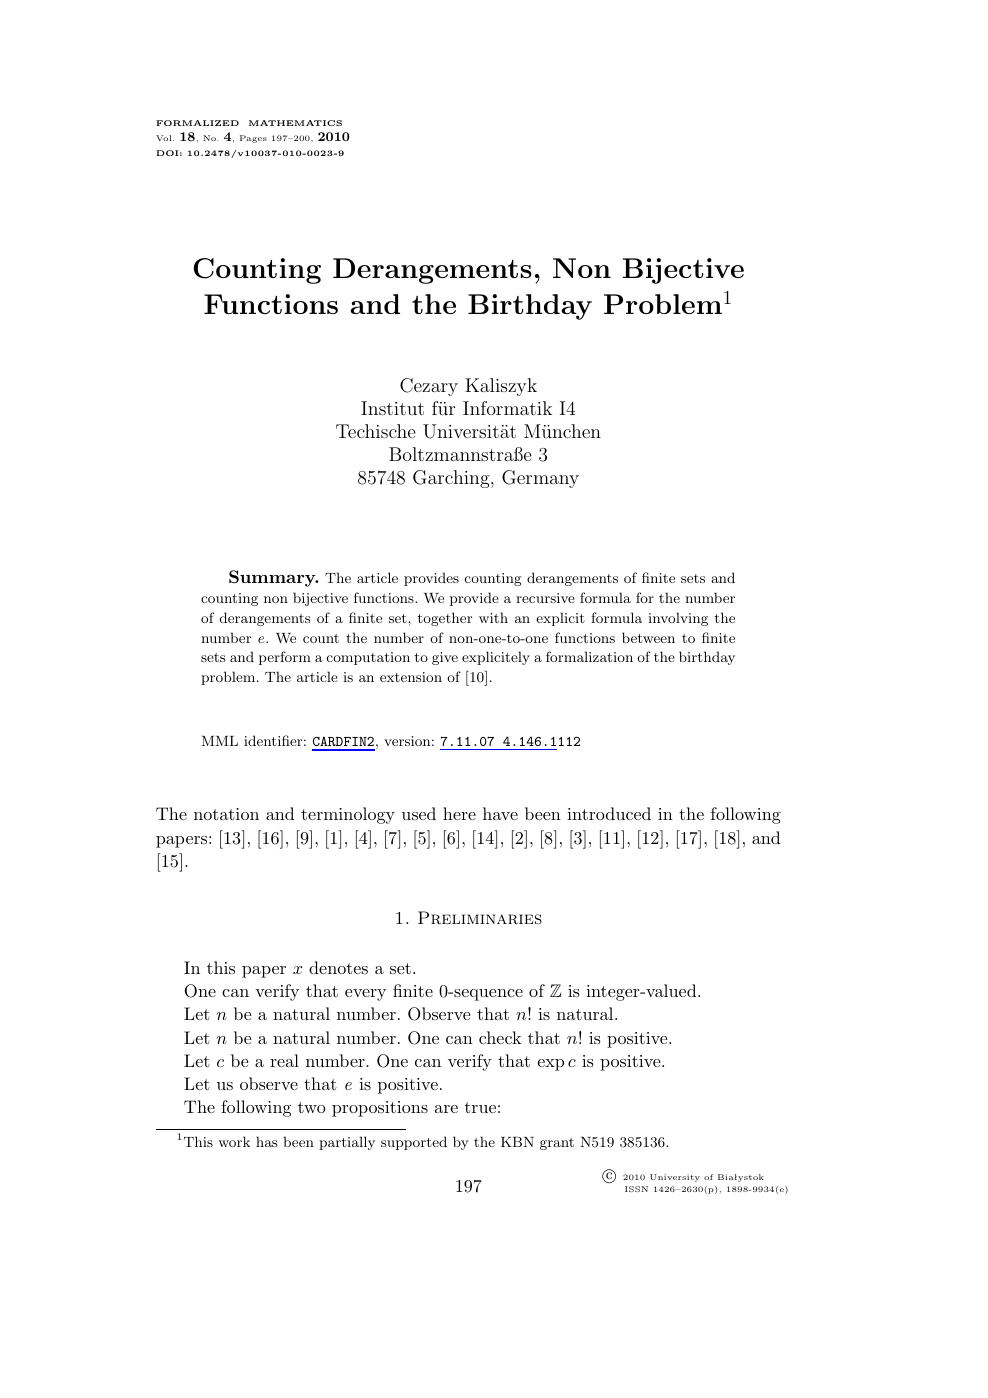 Counting Derangements Non Bijective Functions And The Birthday Problem Topic Of Research Paper In Mathematics Download Scholarly Article Pdf And Read For Free On Cyberleninka Open Science Hub